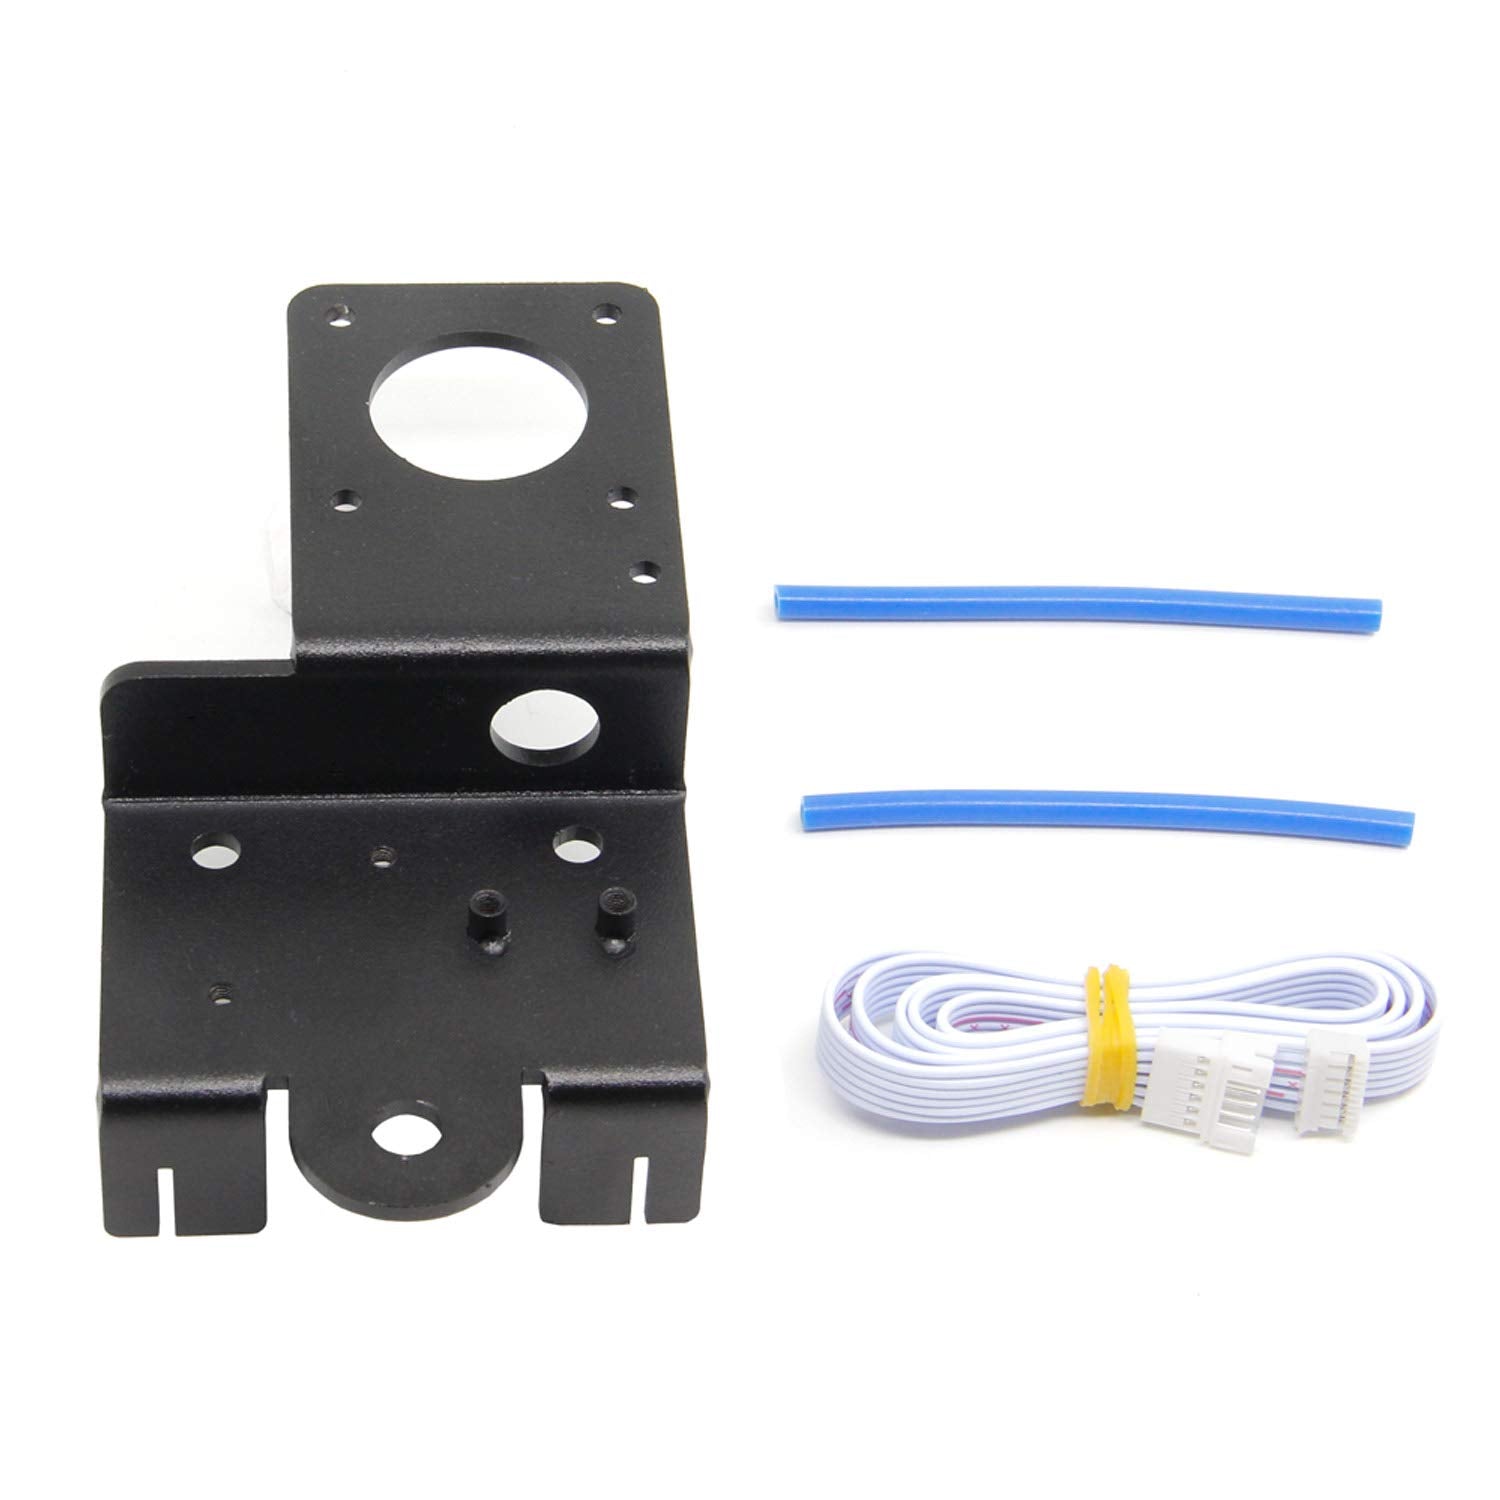 Direct Drive Extruder Upgrade Kit for Creality Ender 3 / Pro / CR-10 3D Printers